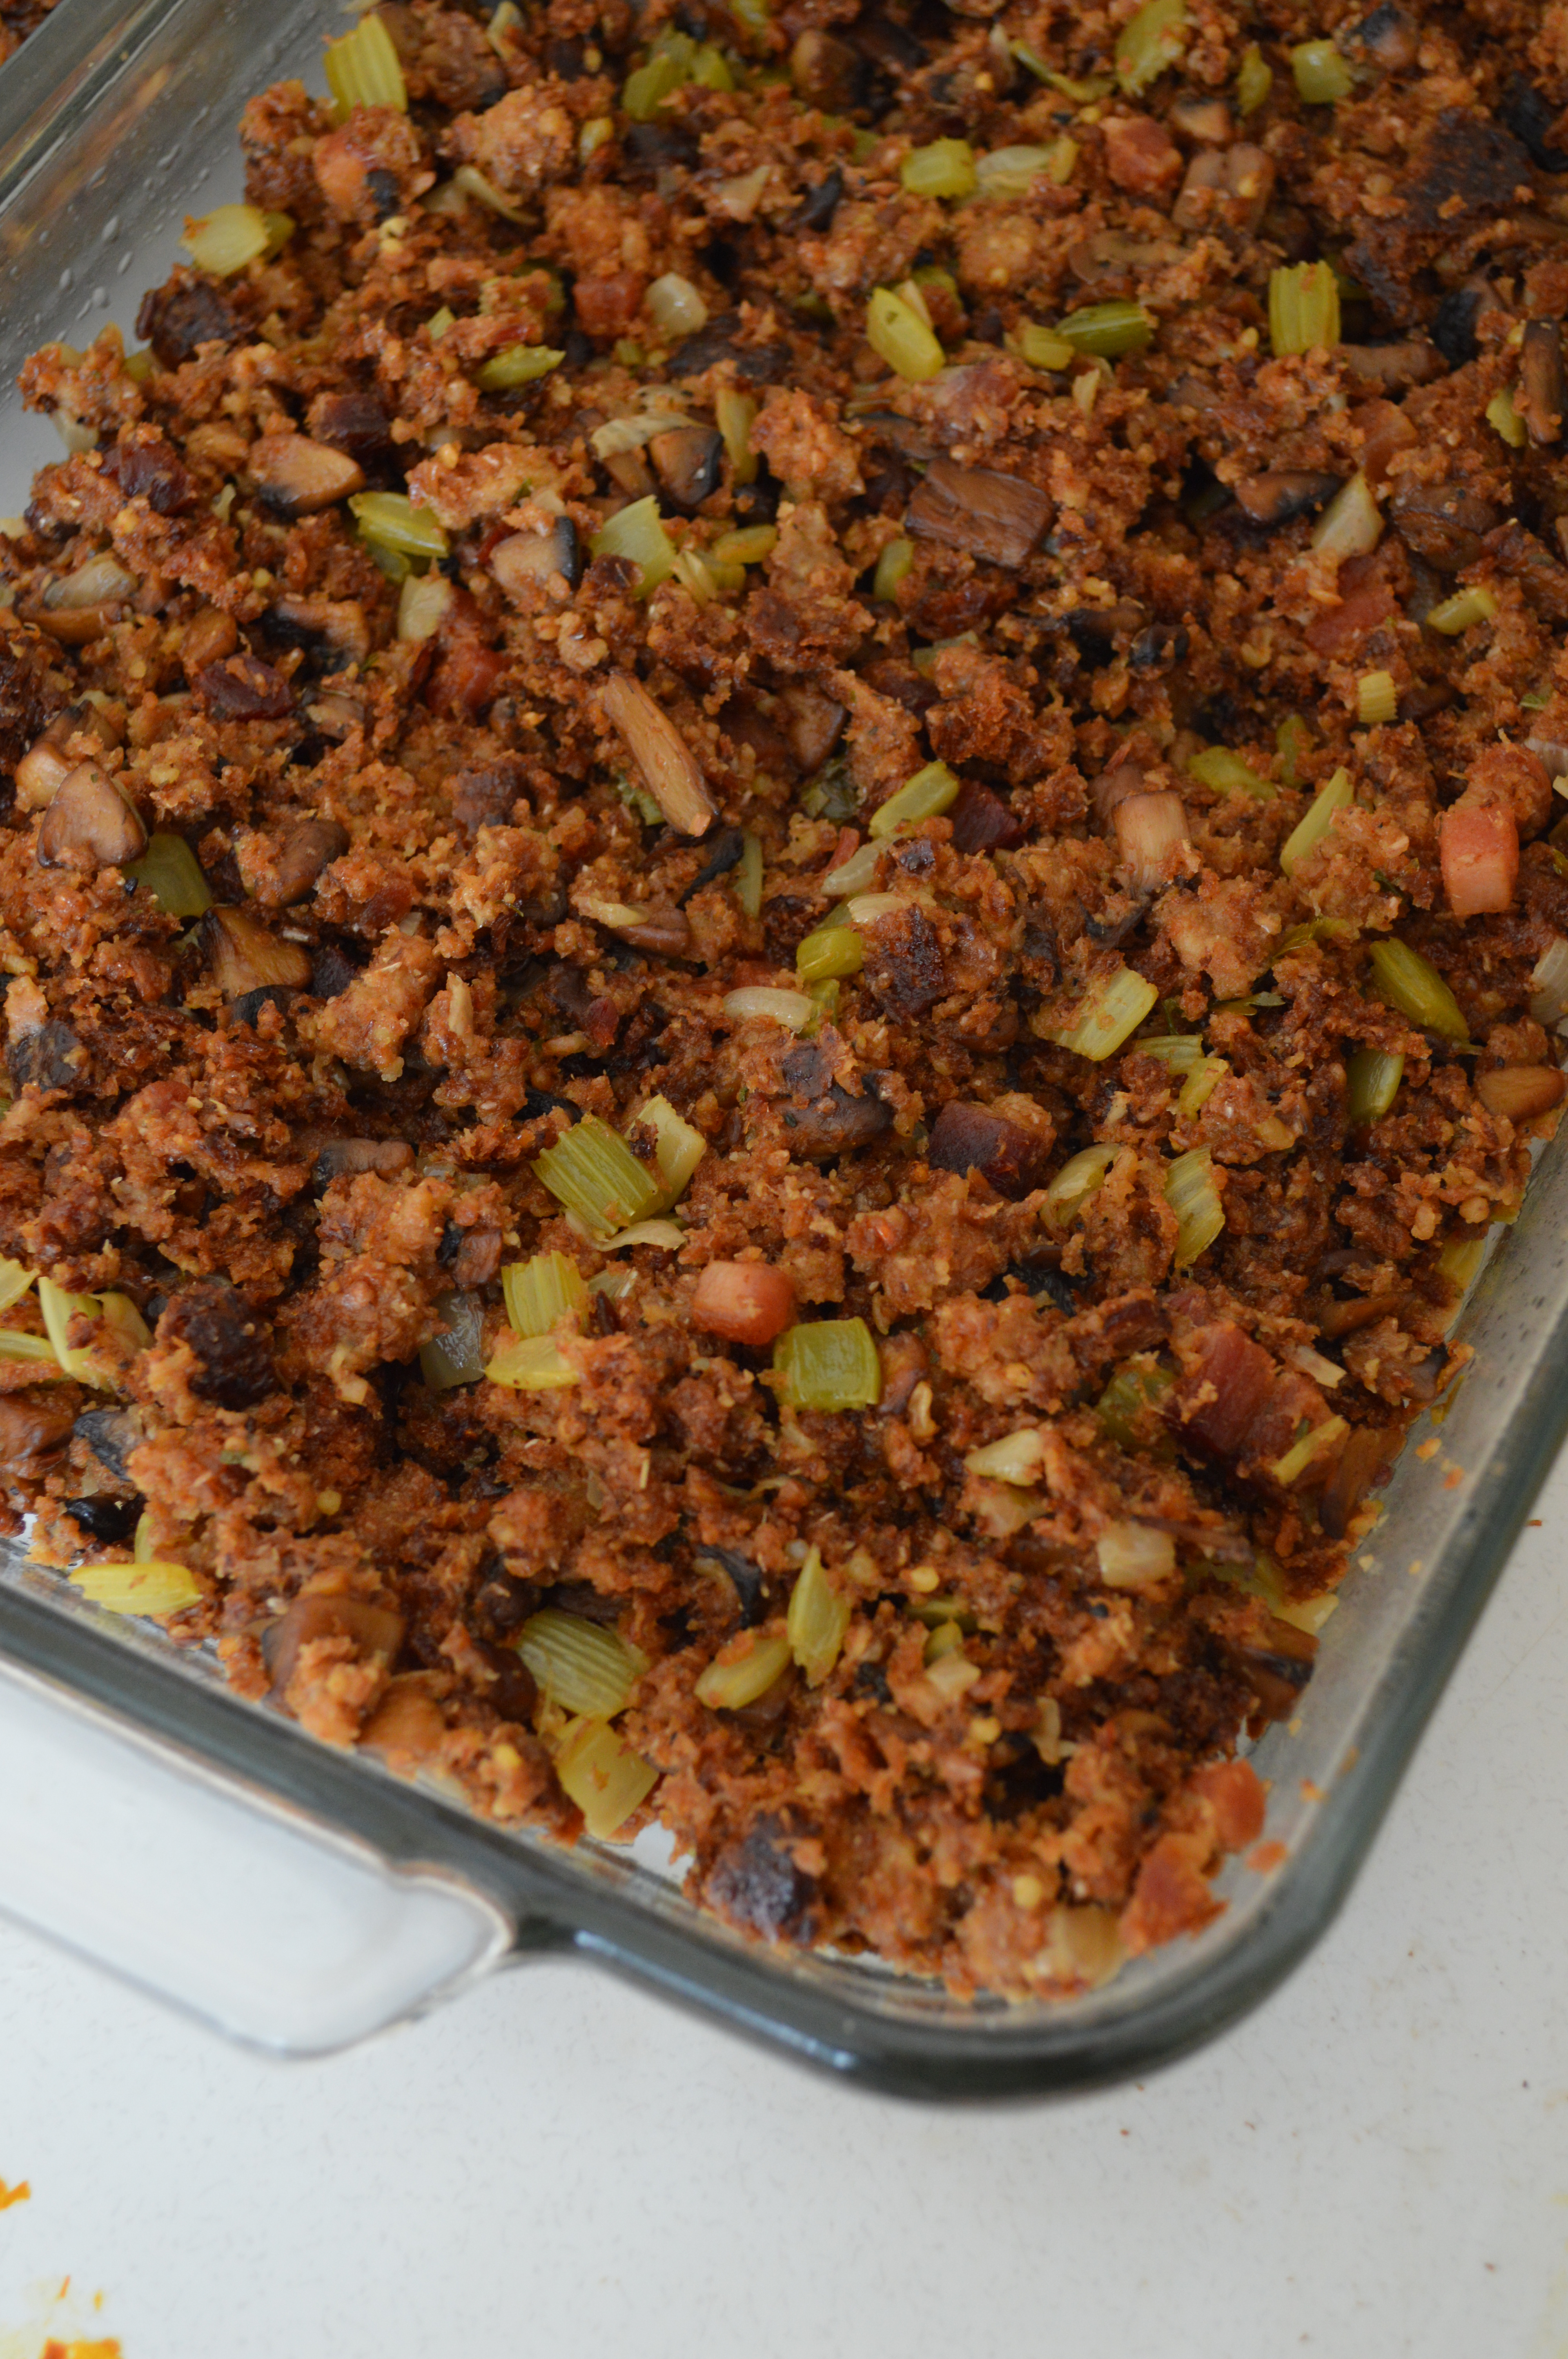 A casserole of Thanksgiving stuffing, or dressing